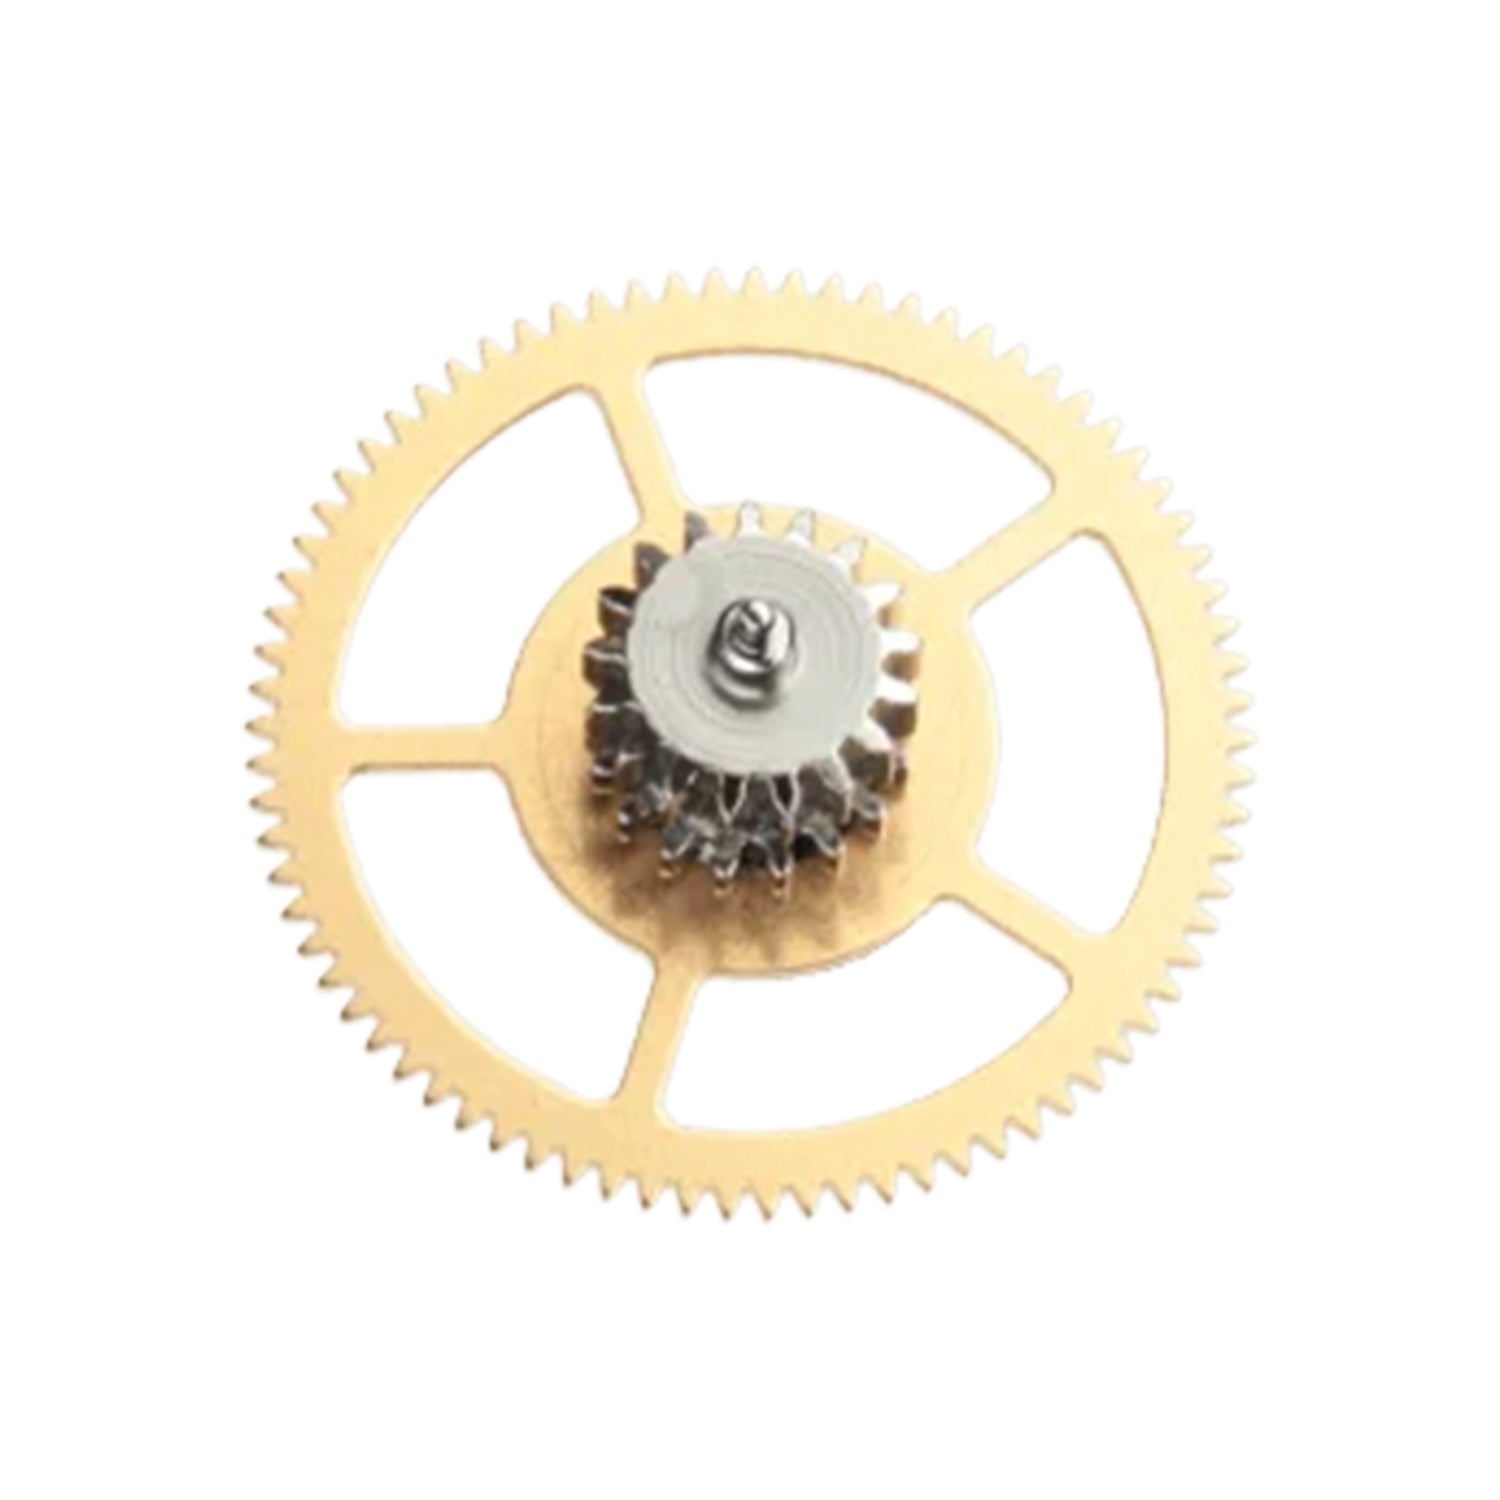 Internal Replacement Watch Parts for ETA 2824-2